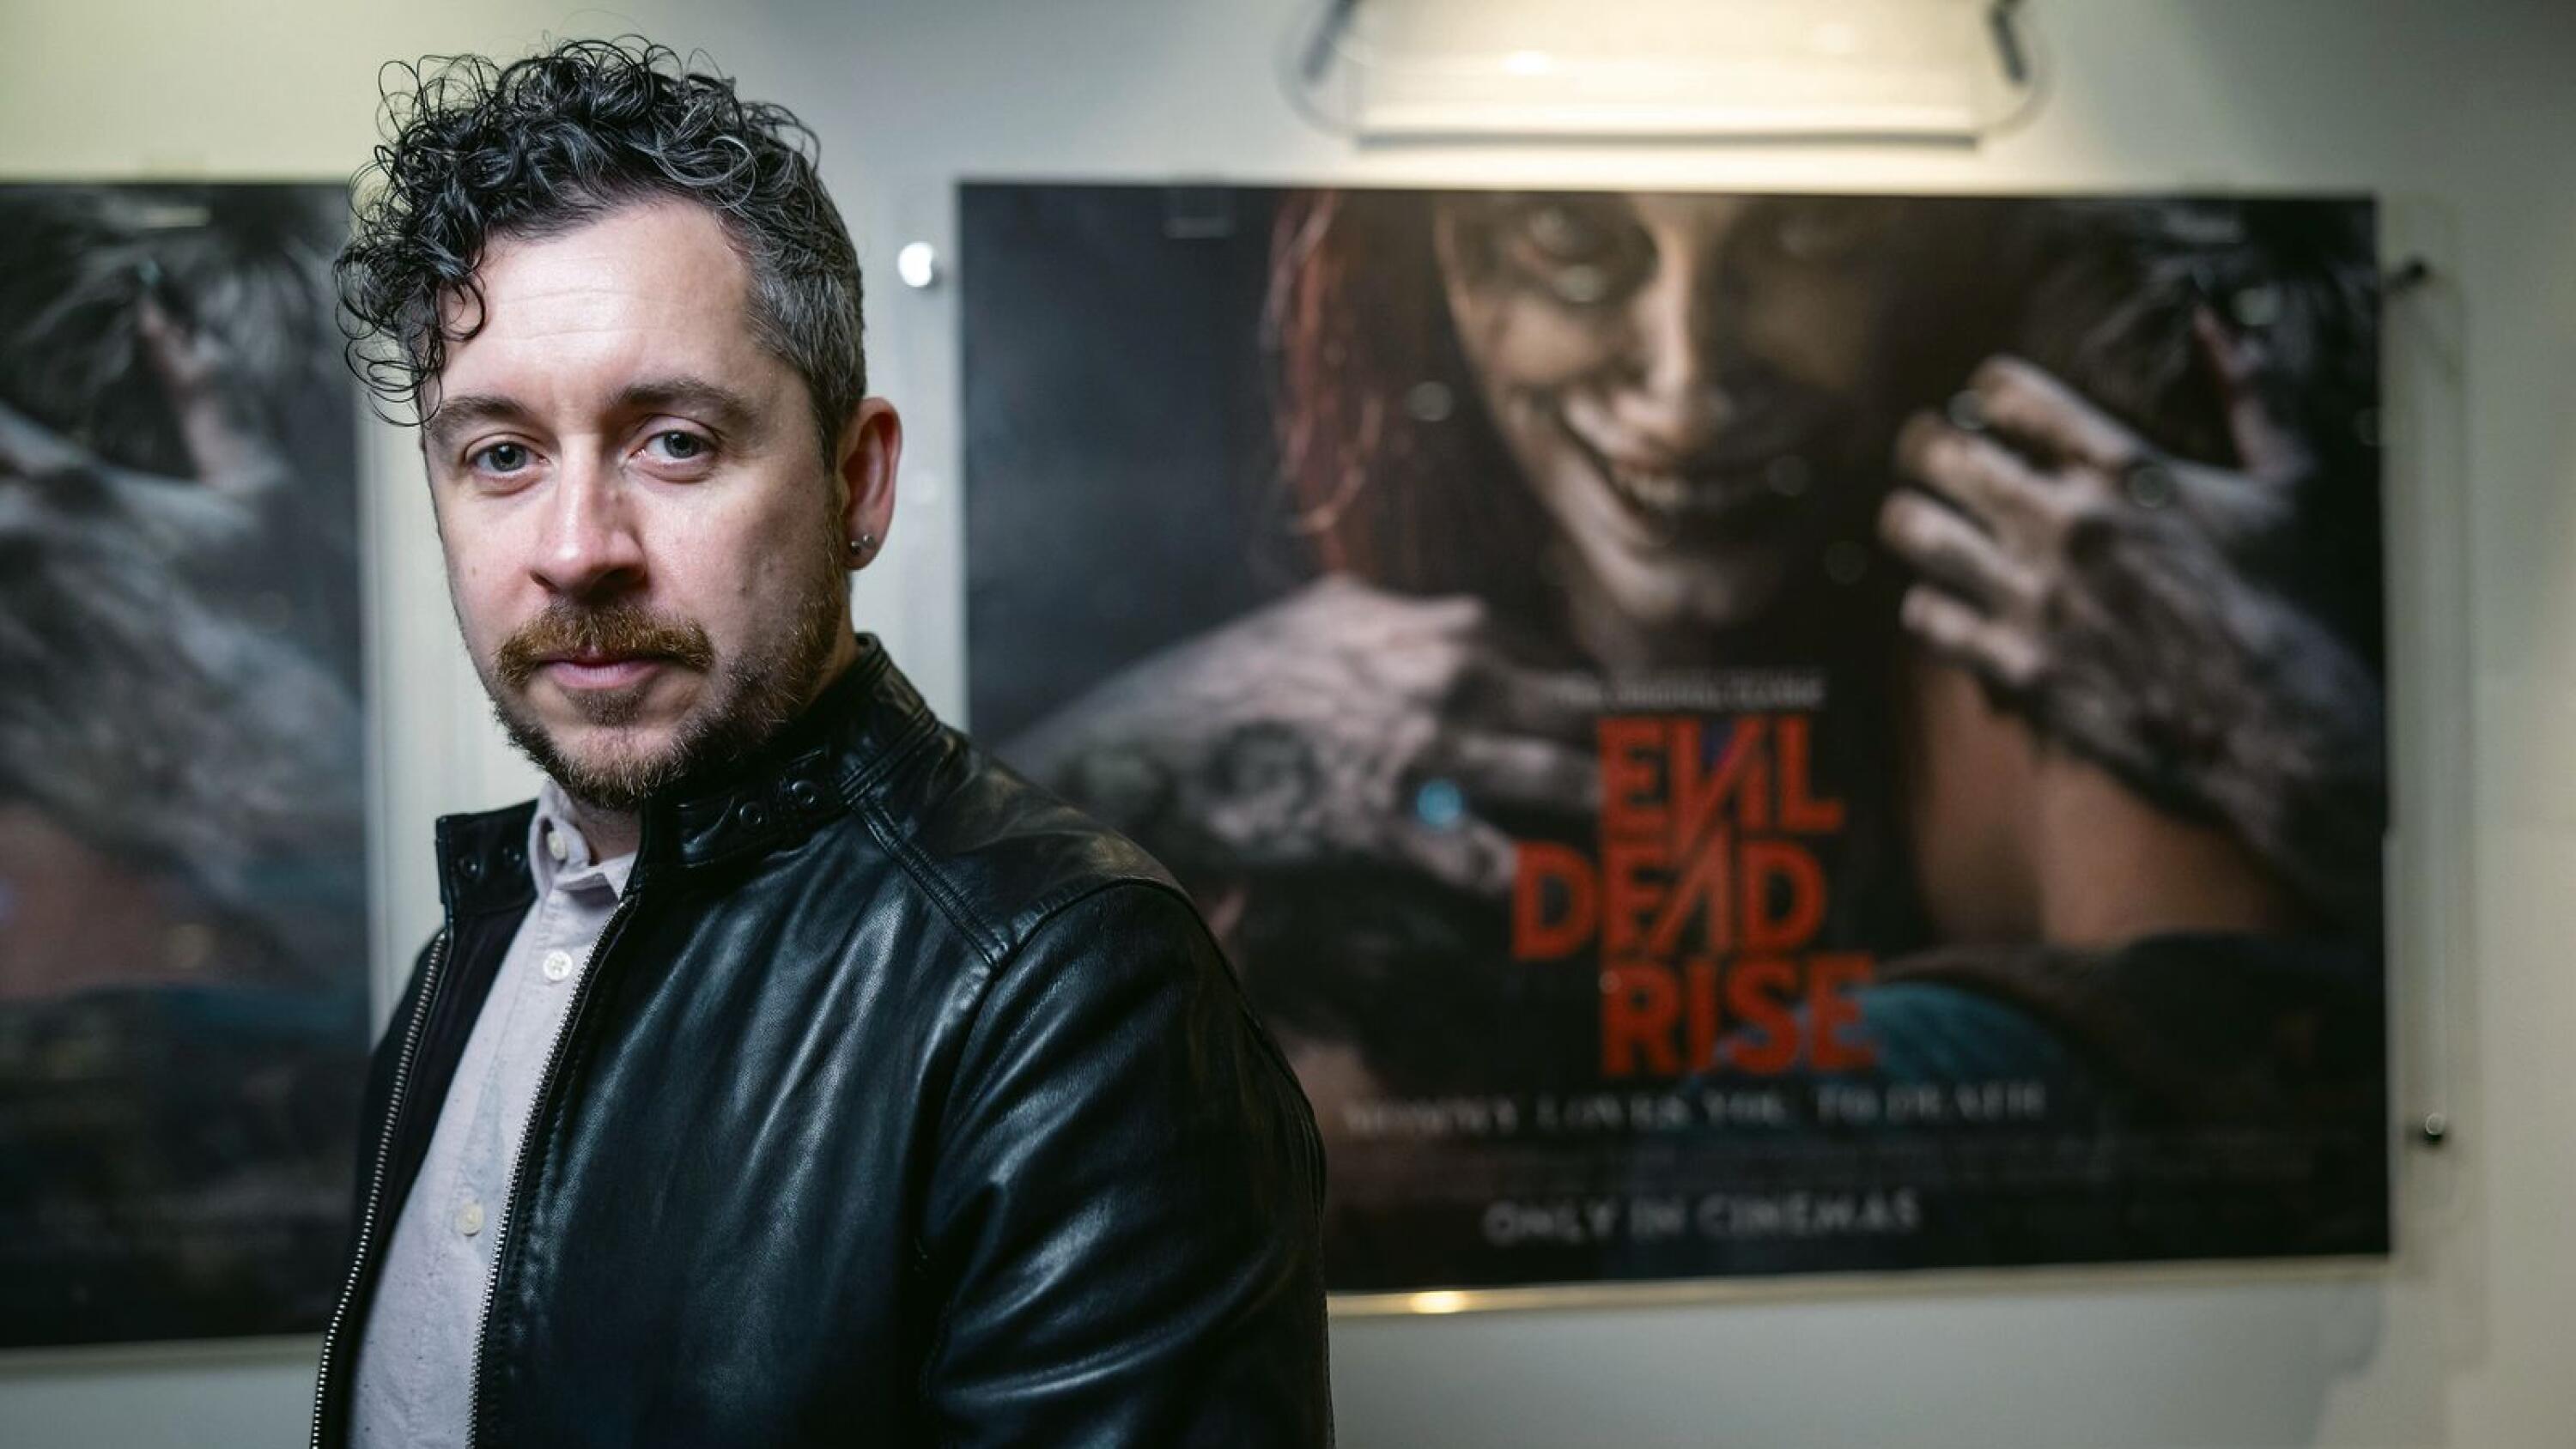 Evil Dead Rise' Director Lee Cronin to Helm New Line's 'Thaw